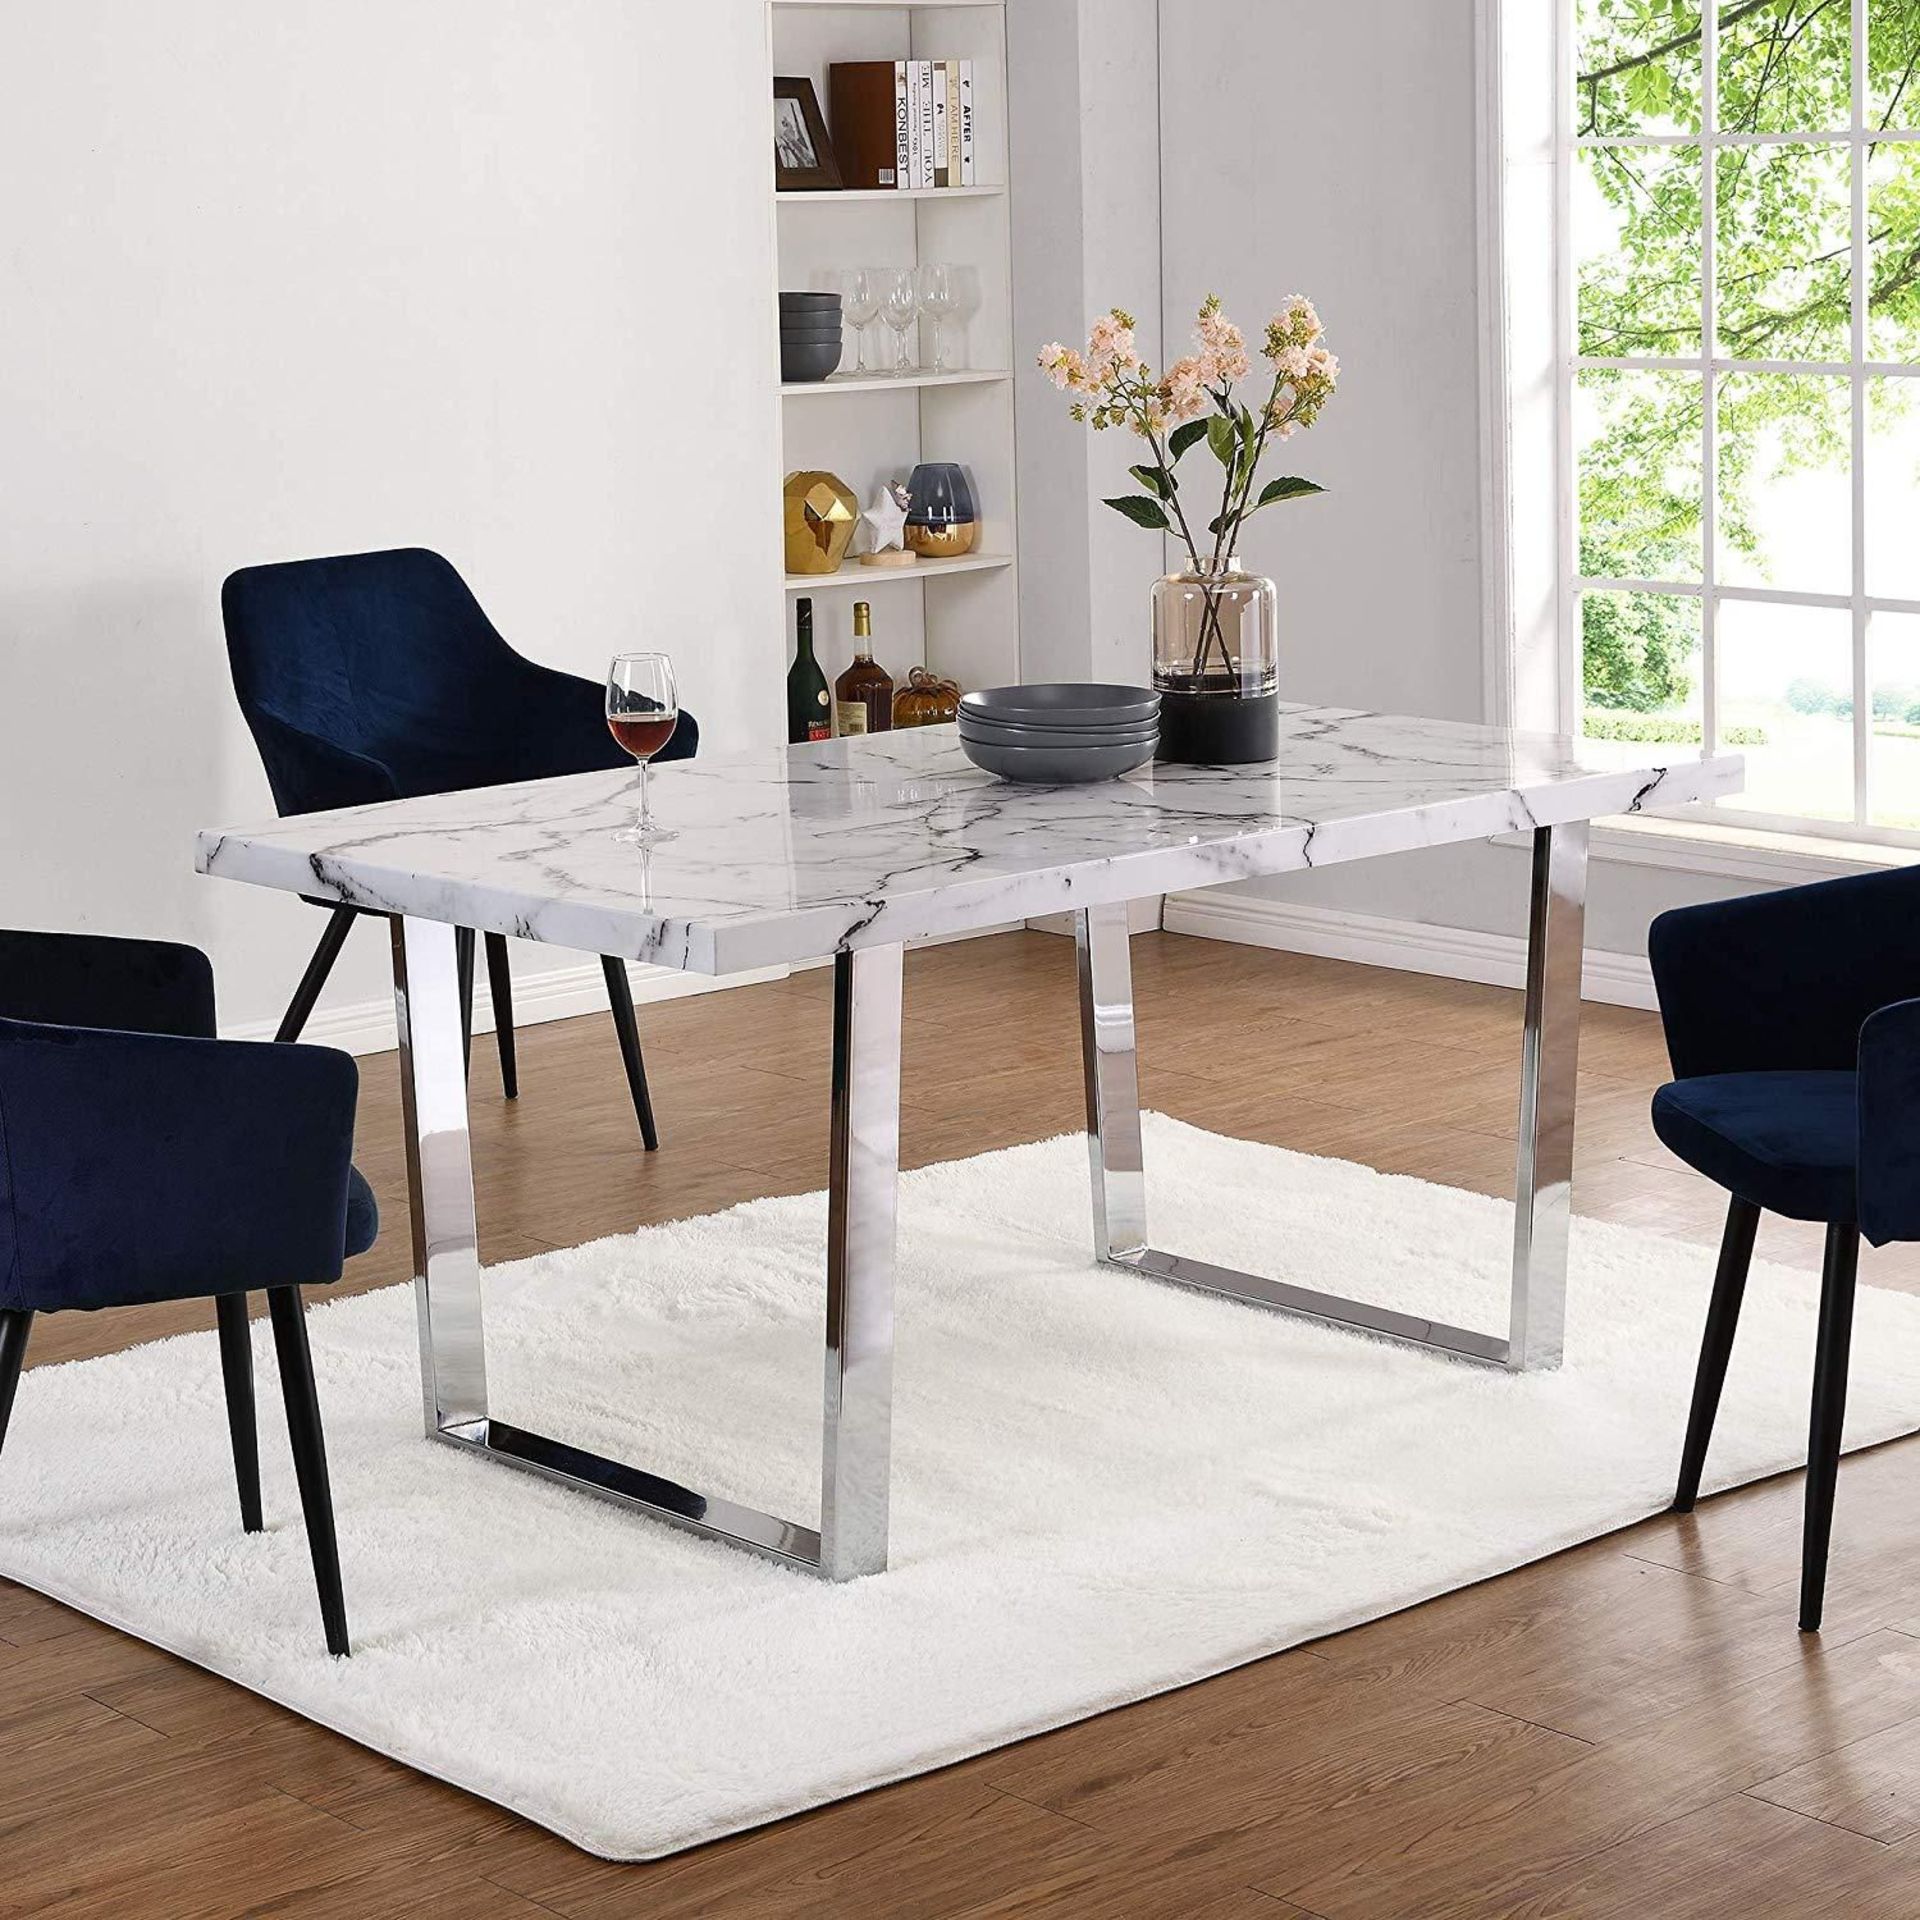 BIASCA 6-Seater High Gloss Marble Effect Dining Table with Silver Chrome Legs White. - BI. RRP £